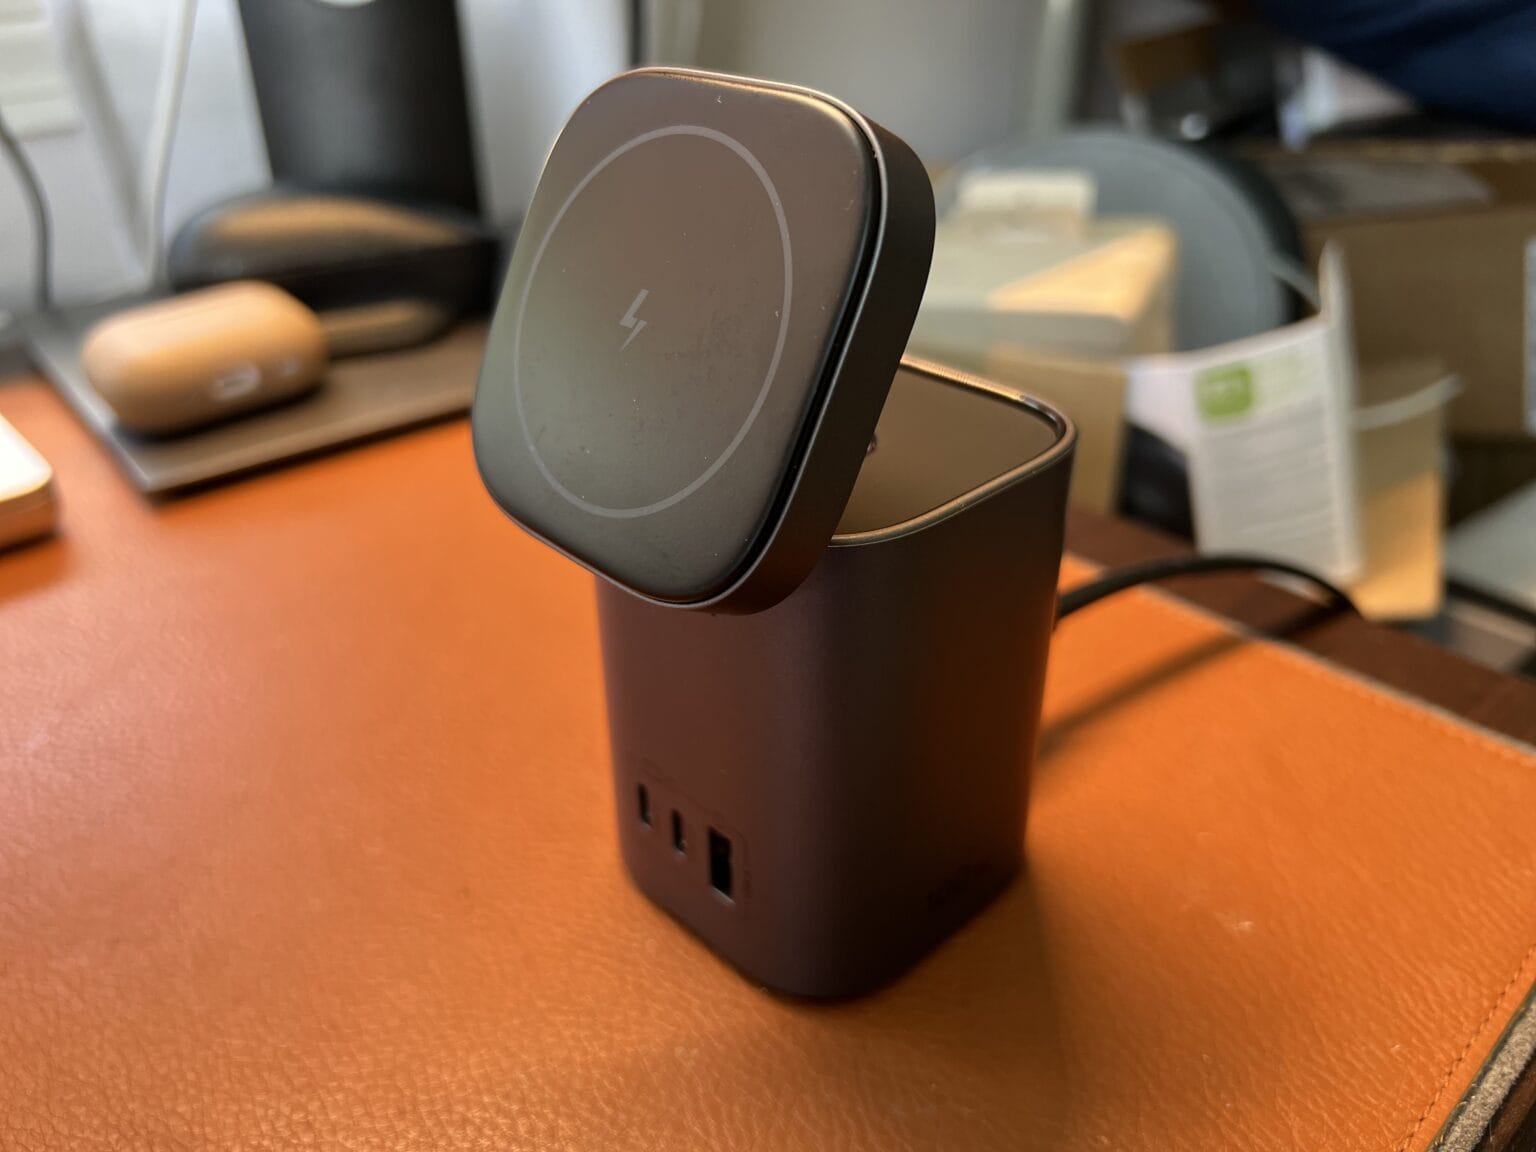 This unusual GaN charger juices up MagSafe iPhones via the tilting platform and other devices via USB-C and USB-A ports (up to 100W).